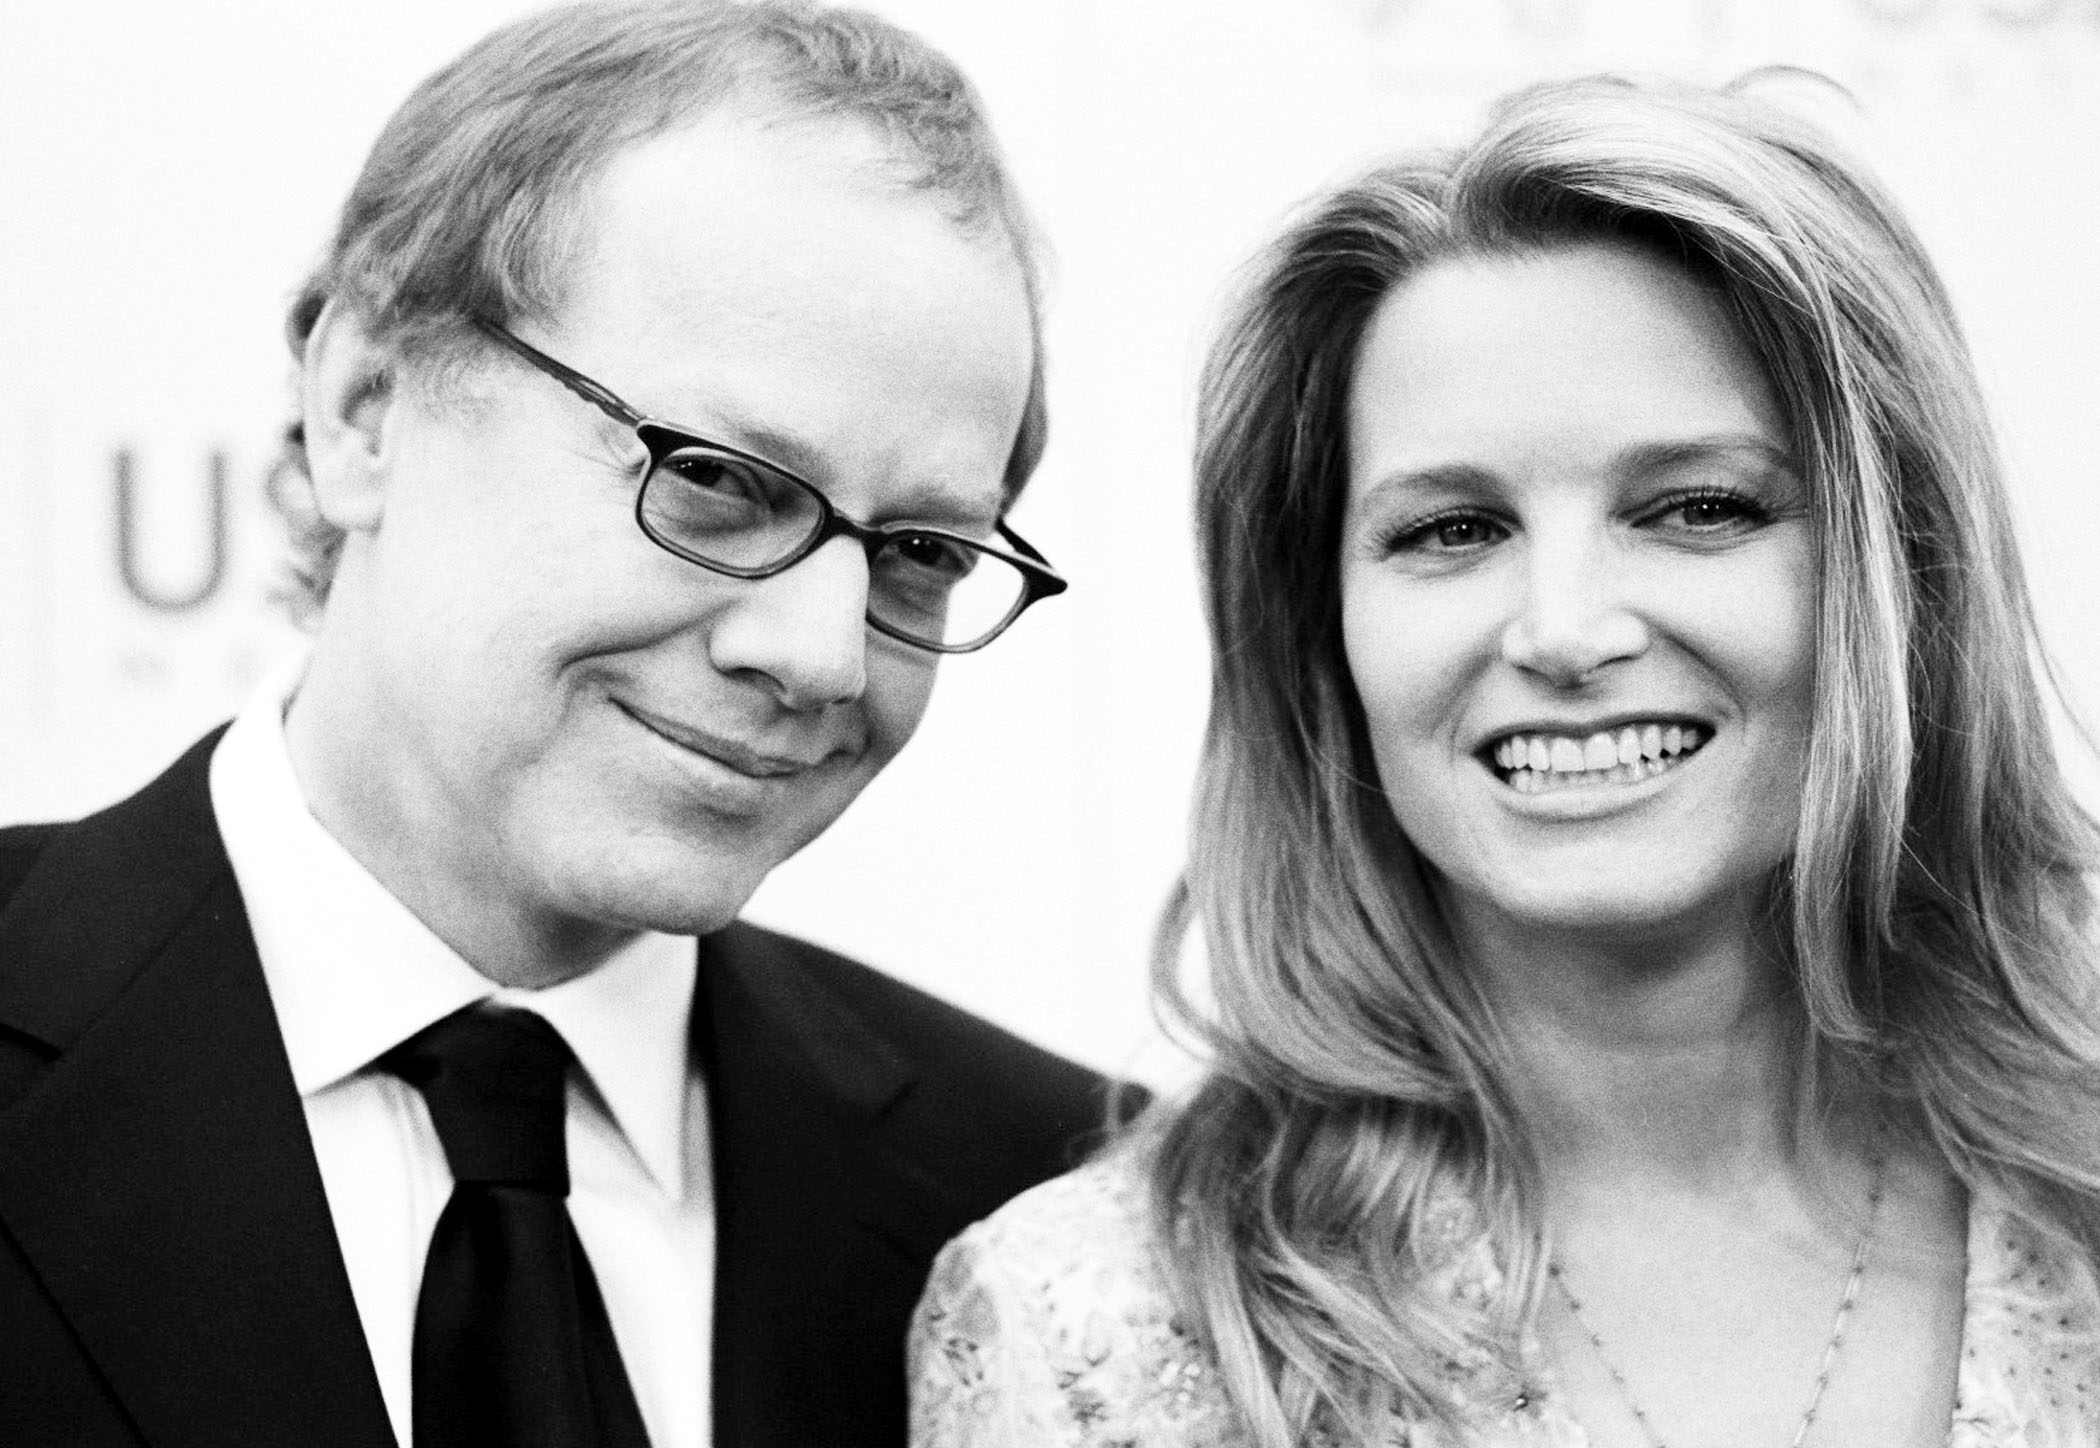 Danny Elfman & Bridget Fonda during 31st AFI Life Achievement Award Presented to Robert De Niro - Red Carpet - Black & White Photography by Chris Weeks at Kodak Theater in Hollywood, California, United States. | Source: Getty Images